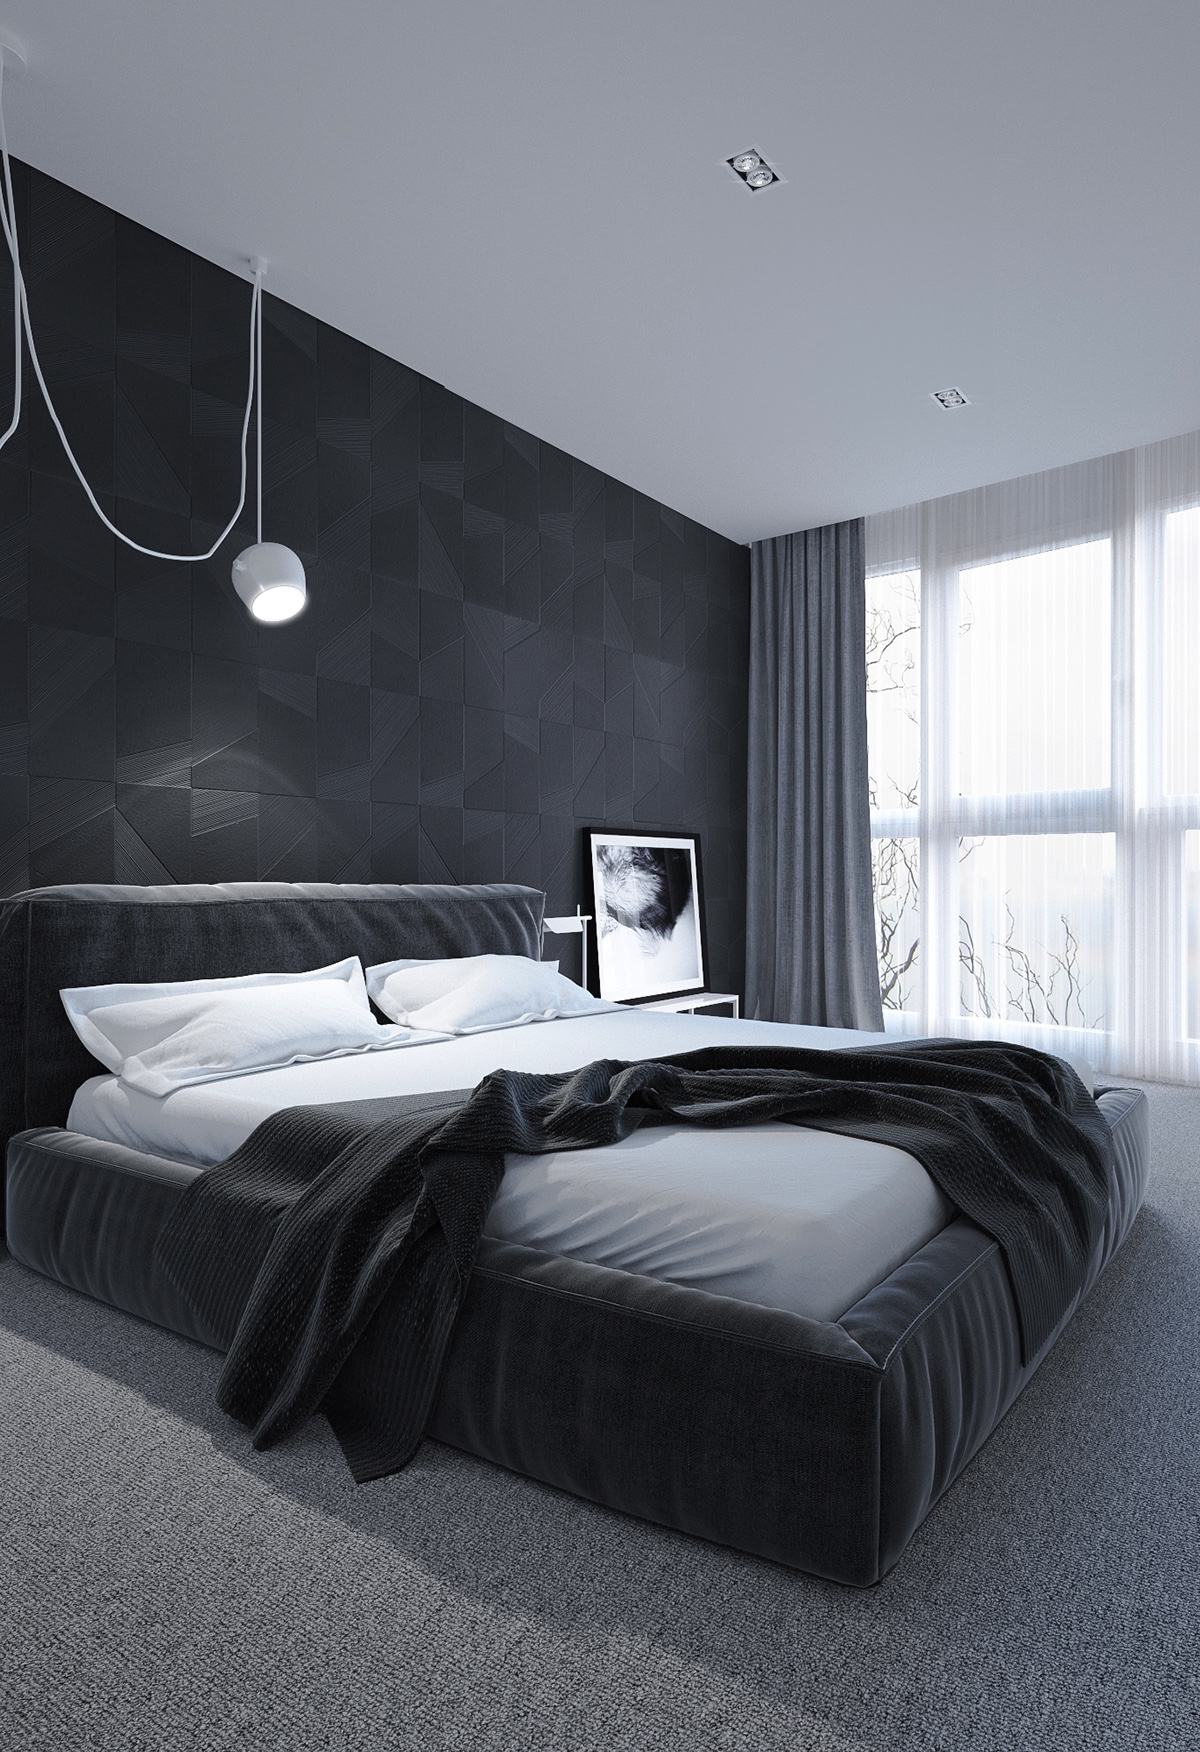 How to Bring Inspiration Into Your Dreams With Dark Bedroom Master Bedroom Ideas